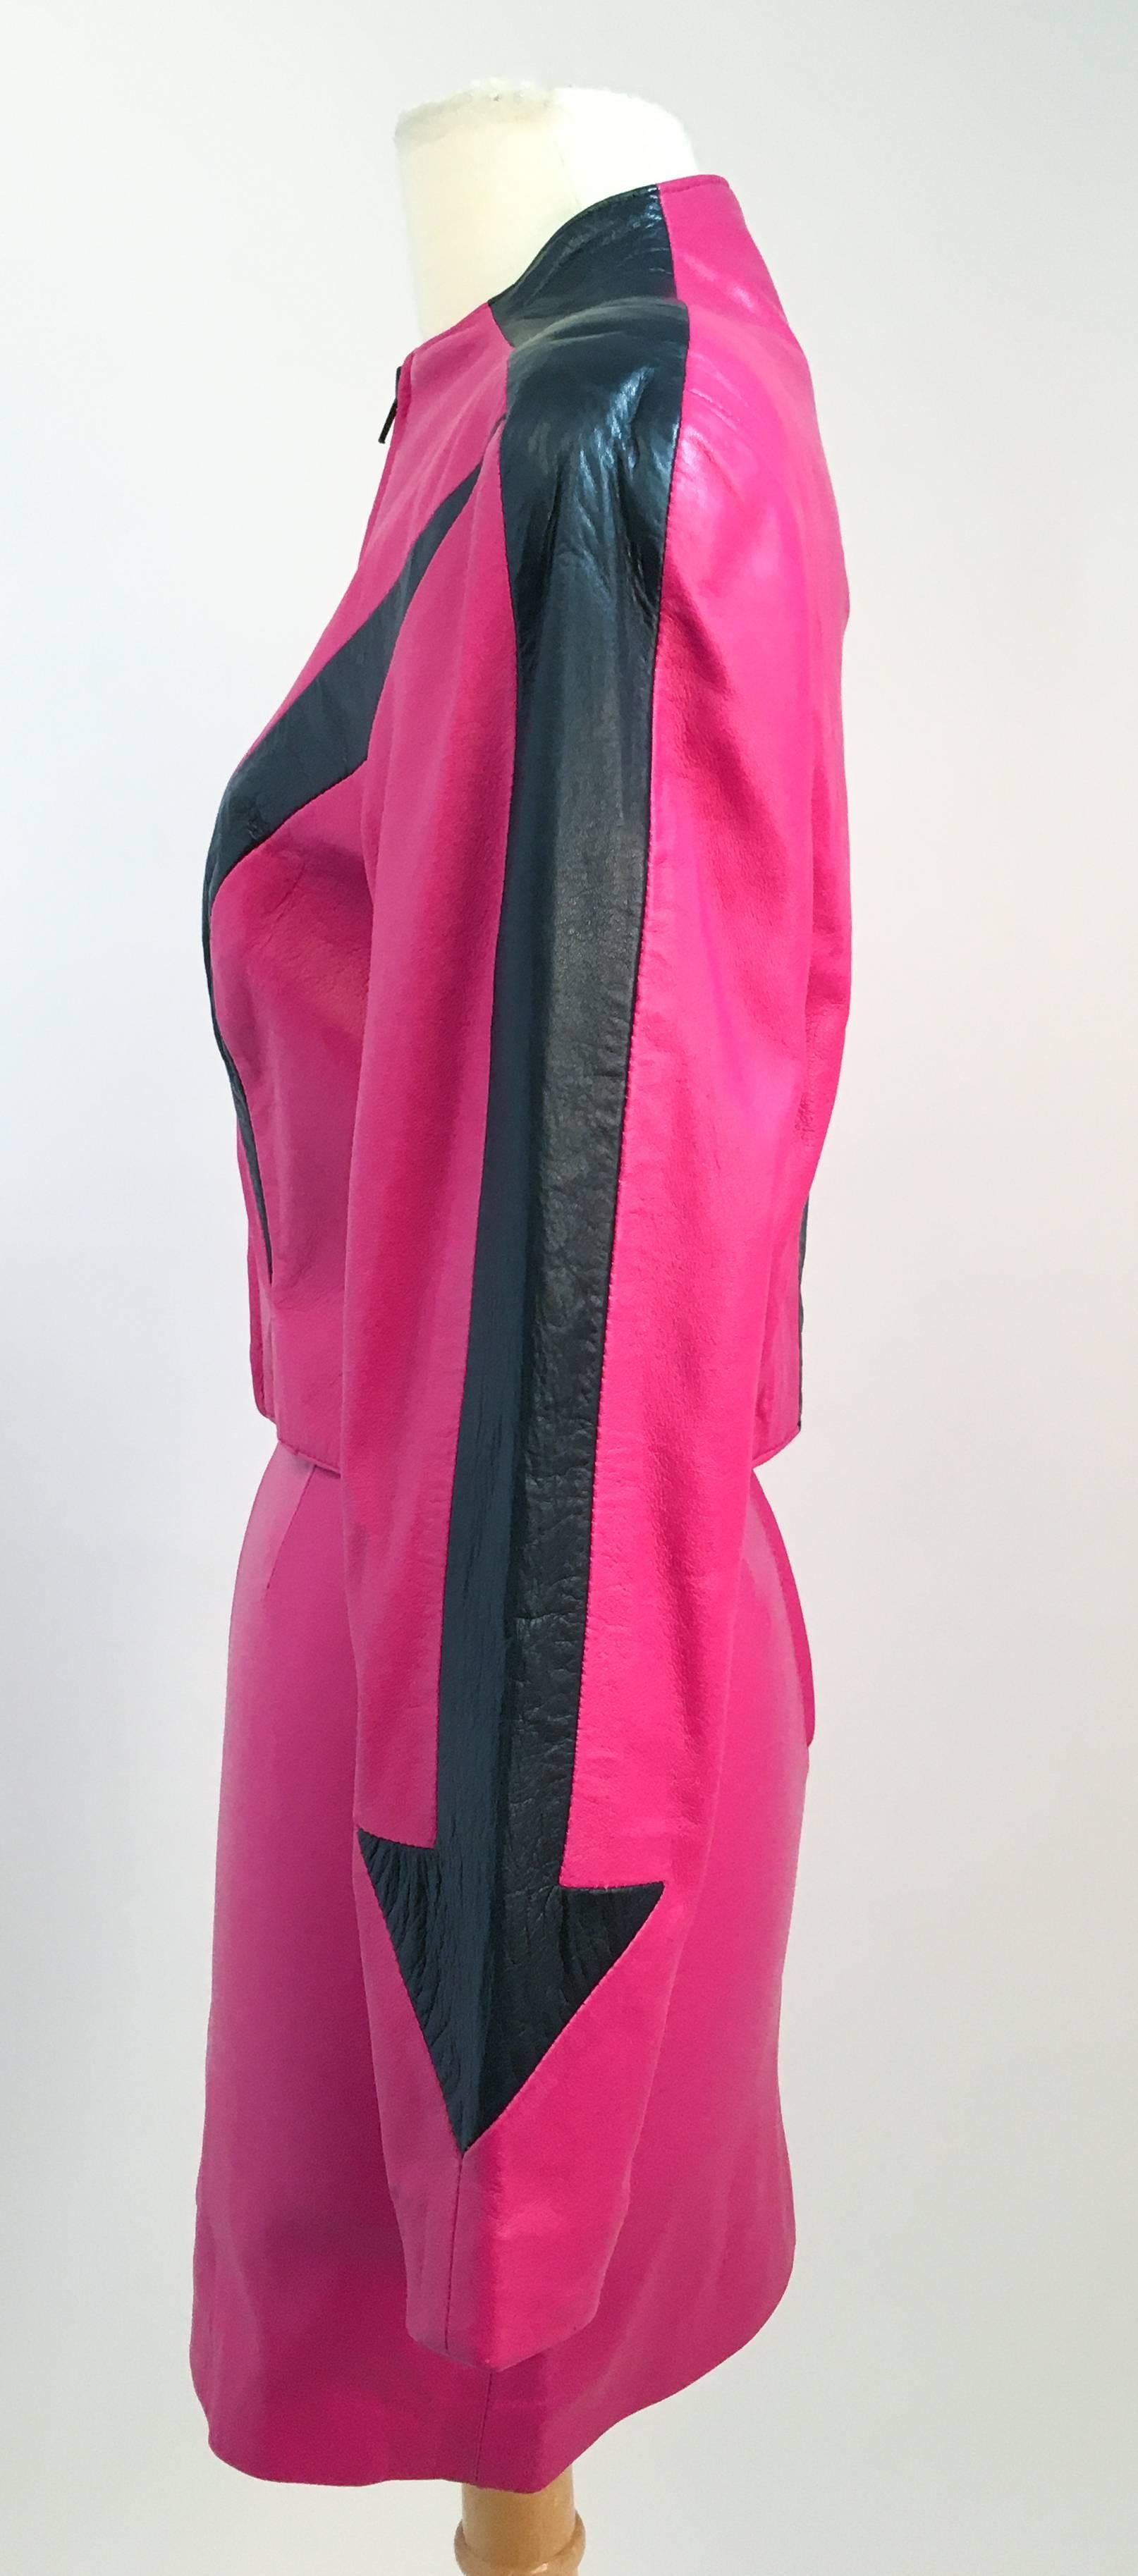 80s Michael Hoban North Beach Leather Hot Pink Jacket and Mini Skirt Set. Collarless jacket with black and pink contact arrow motif. 